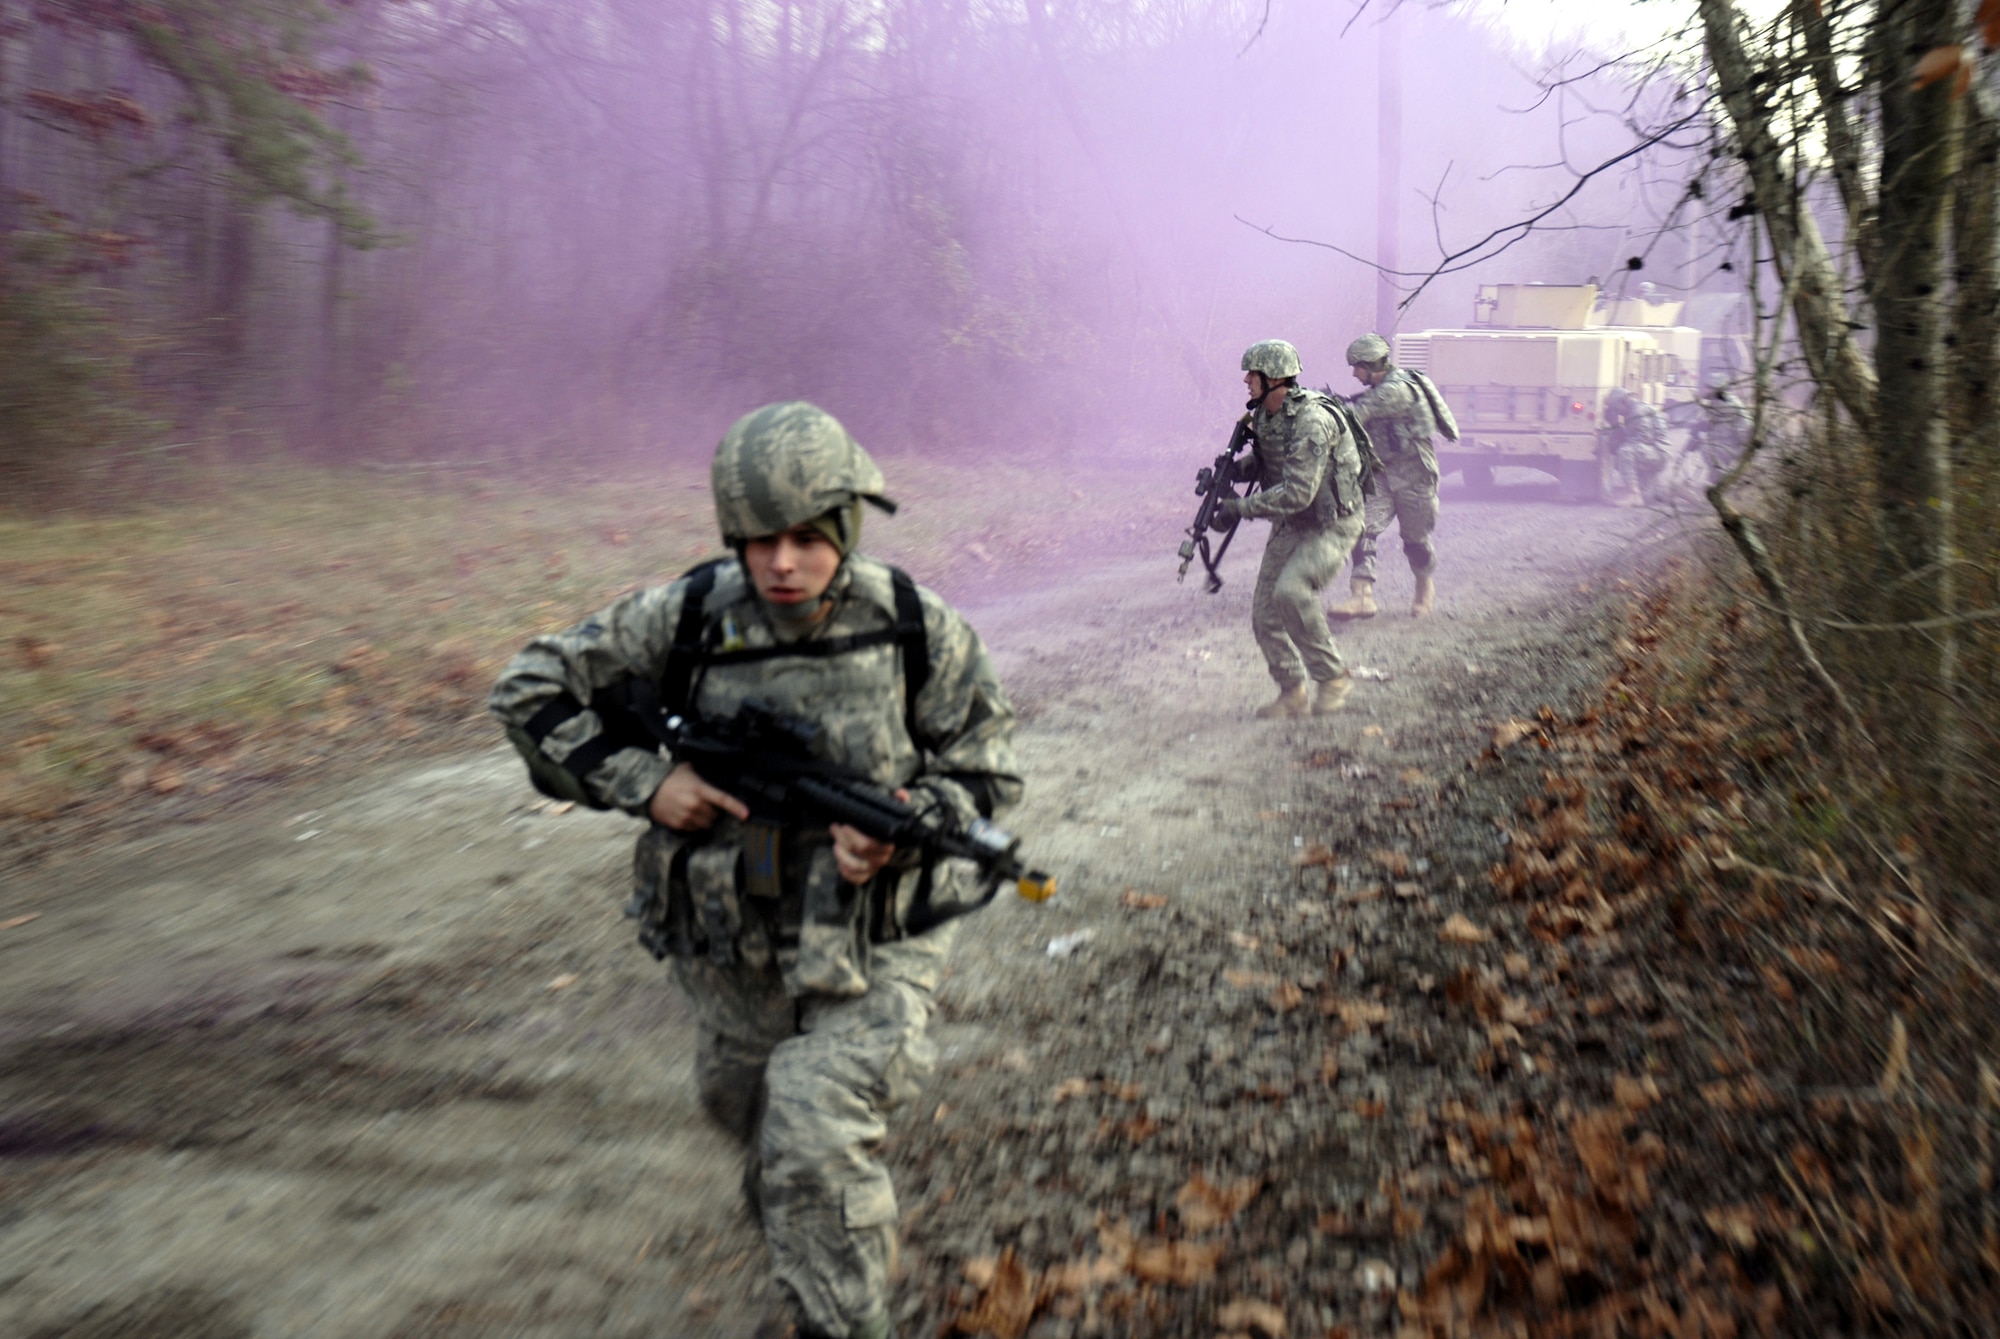 Students in the Air Force Phoenix Warrior Training Course respond to "enemy action" during mounted and dismounted patrol (convoy) training on a Fort Dix, N.J., range Dec. 5, 2008.  The course, taught by the U.S. Air Force Expeditionary Center's 421st Combat Training Squadron, prepares Air Force security forces for upcoming deployments.  (U.S. Air Force Photo/Staff Sgt. Paul R. Evans)